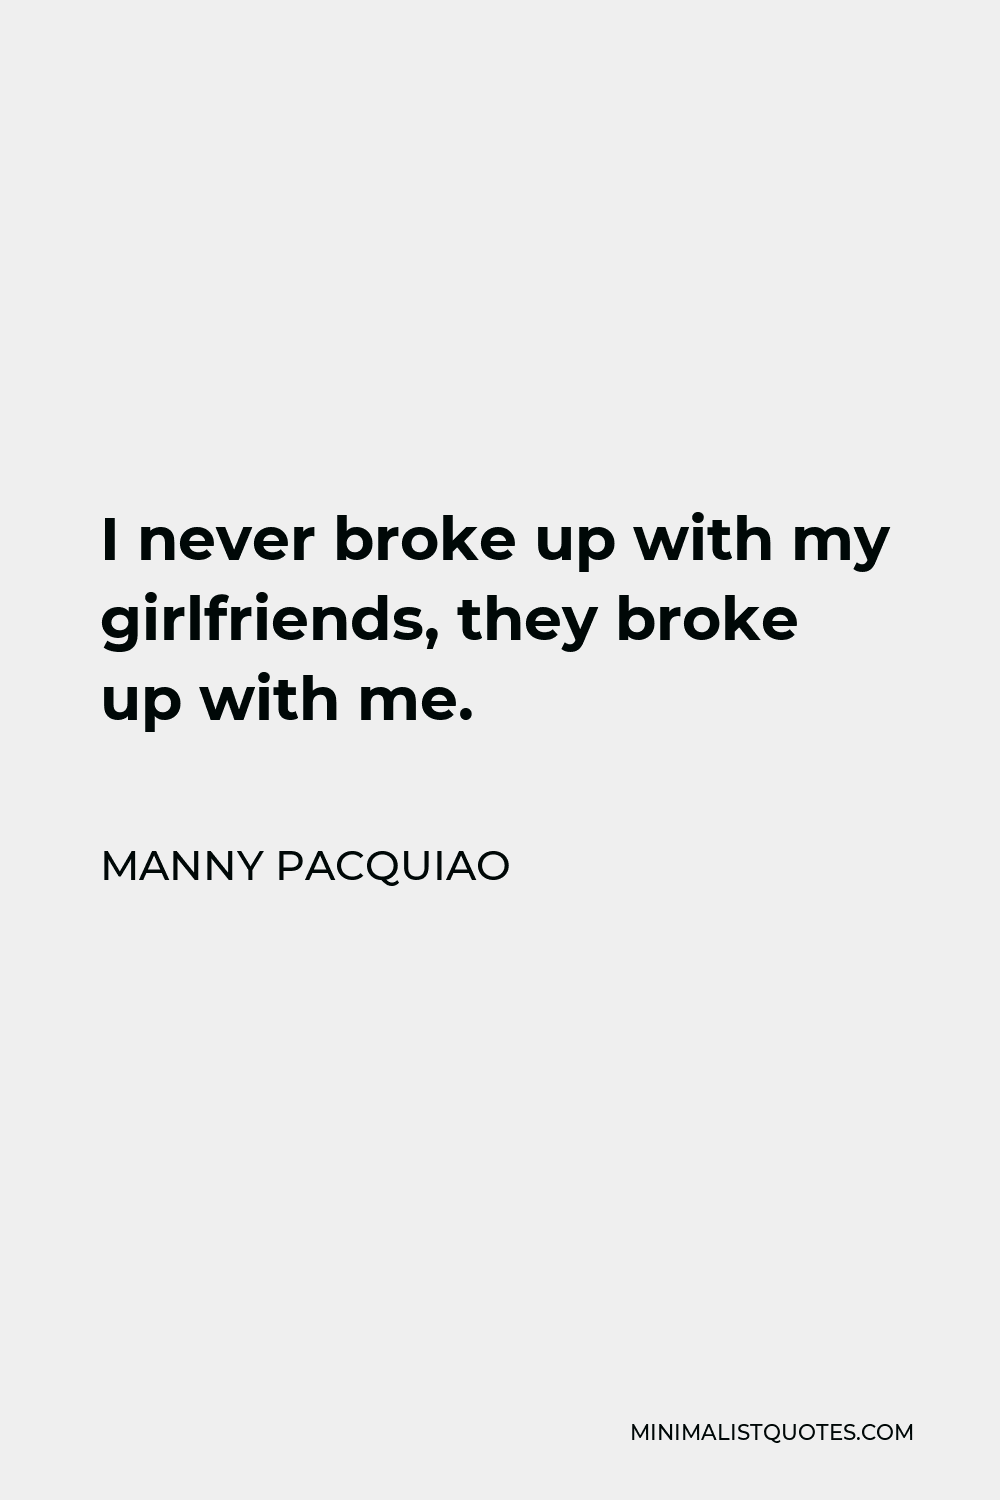 Manny Pacquiao Quote - I never broke up with my girlfriends, they broke up with me.